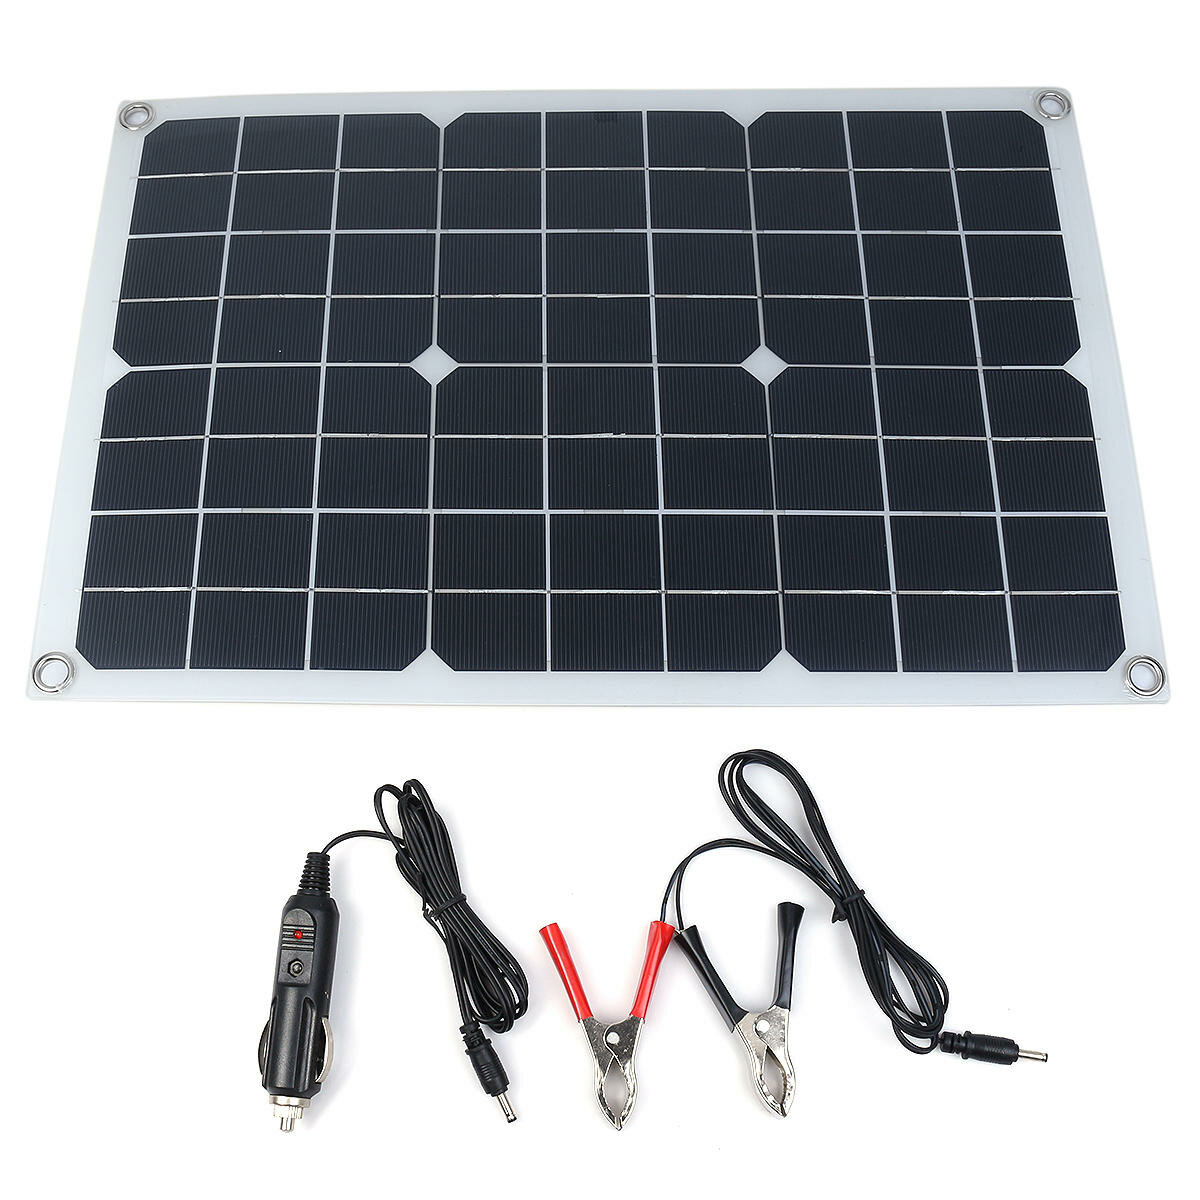 18V 100W Solar Panel Portable Solar Power Bank for Outdoors Camping Boat Smartphones Battery Chargers Cells Emergency Power